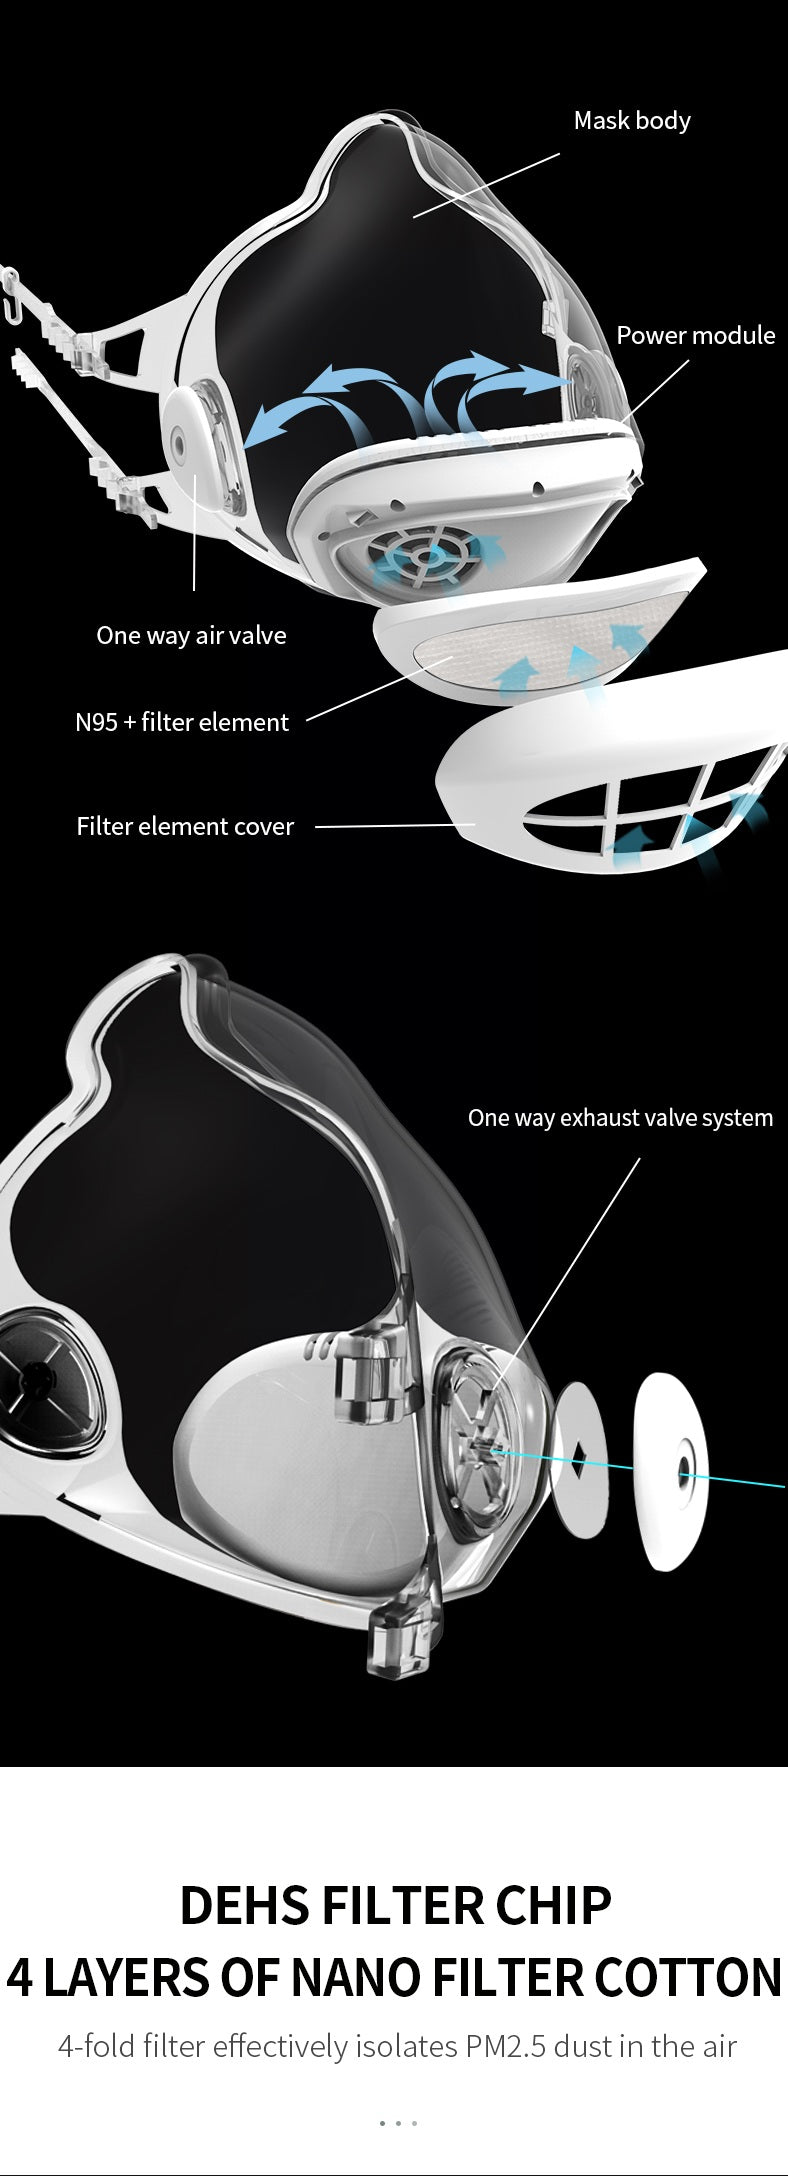 Transparent HEPA filter Mask - Clear 3-speed Fan Airflow Mask - N95 Filter, One-way Air Valve   - Lyfy-CLEAR-HEPA-Mask LyFy.co